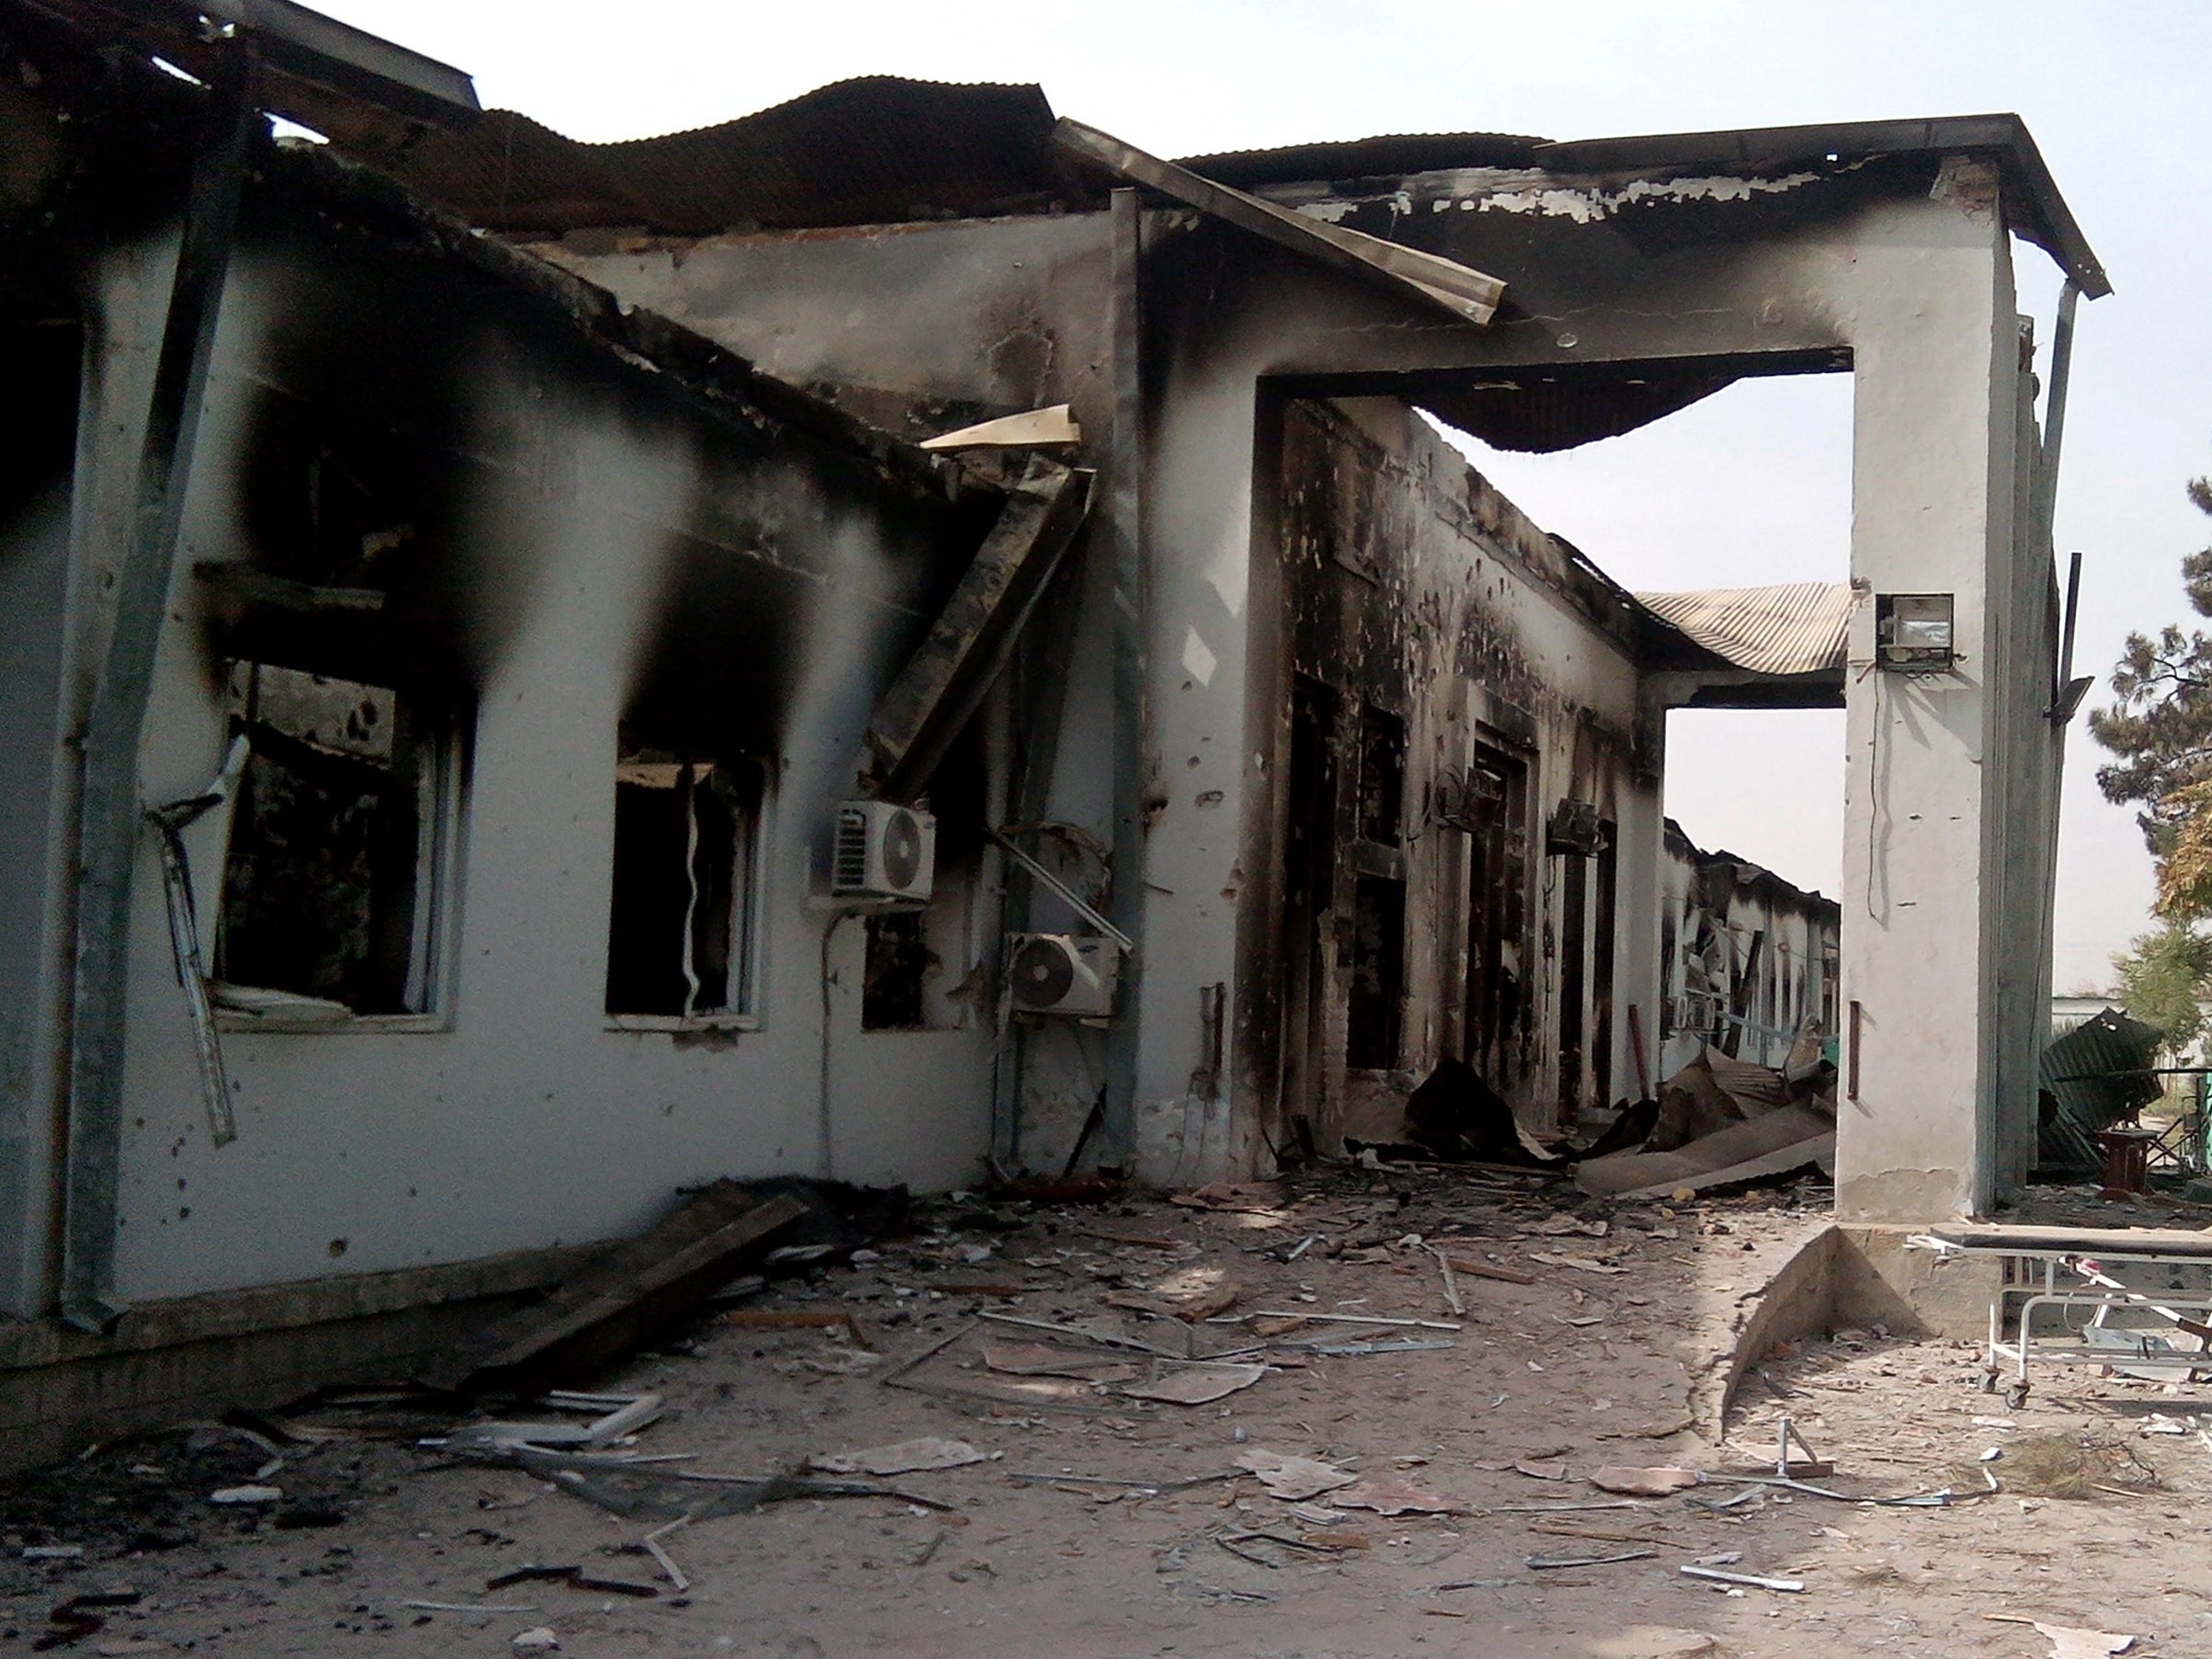 The damaged hospital in which the Doctors Without Borders medical charity operated is seen following a U.S. airstrike in the northern city of Kunduz. (Photo by STR/AFP/Getty Images)